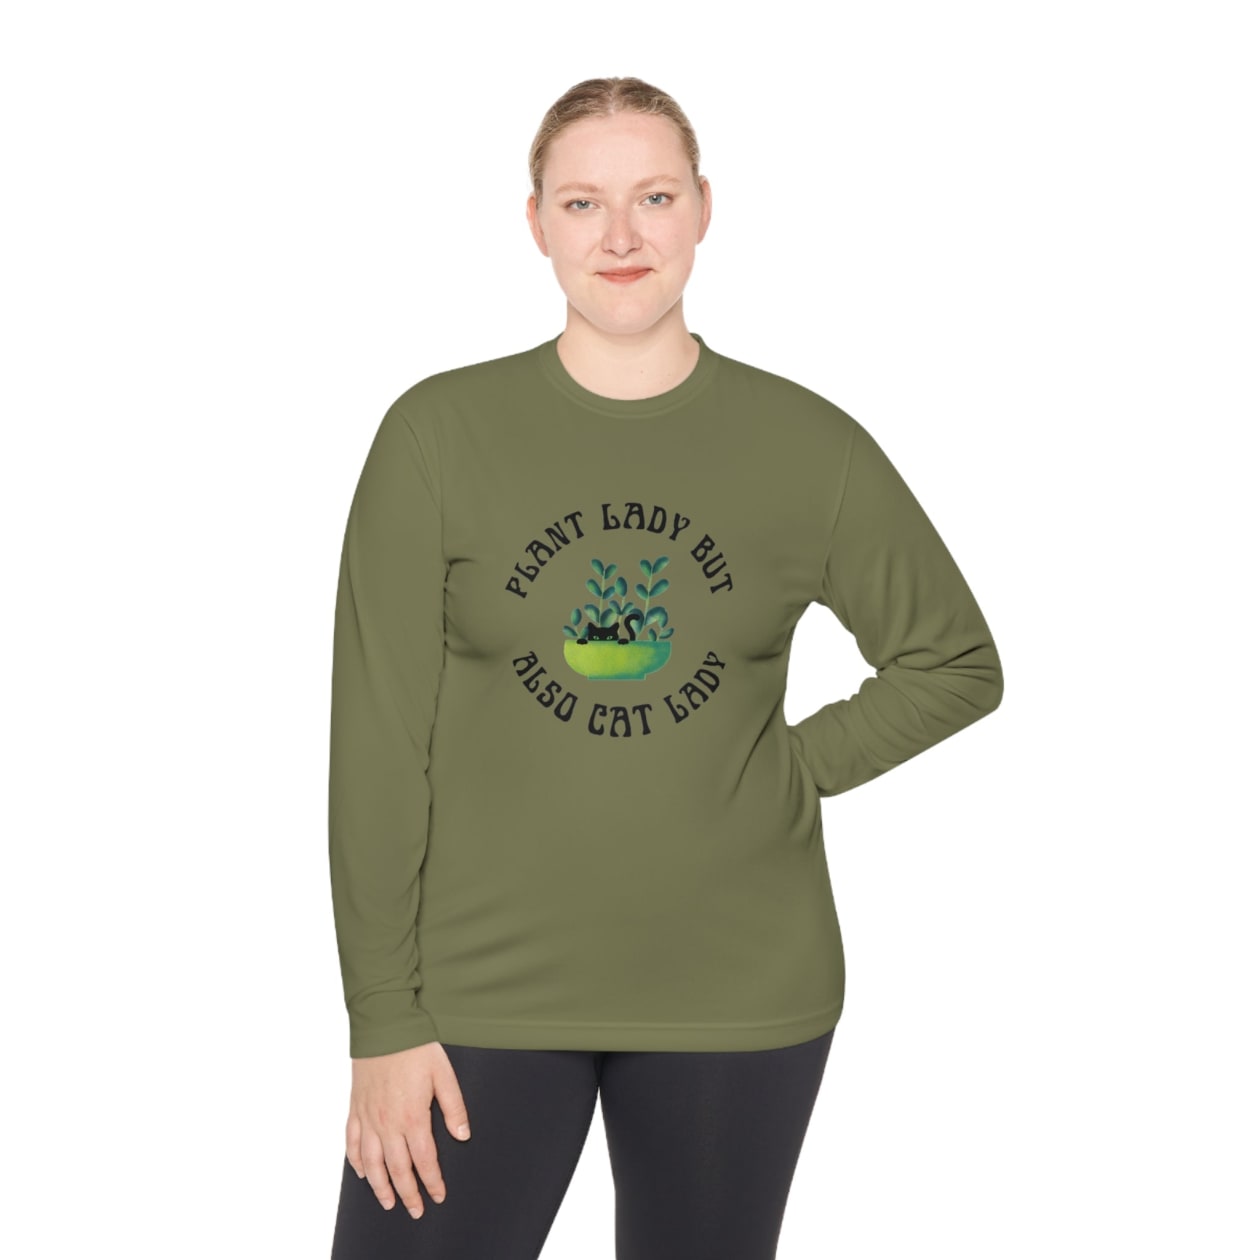 Plant Lady But Also Cat Lady Unisex Lightweight Long Sleeve Tee (Sizes through 4X) - Color: Olive Drab Green, Size: XS